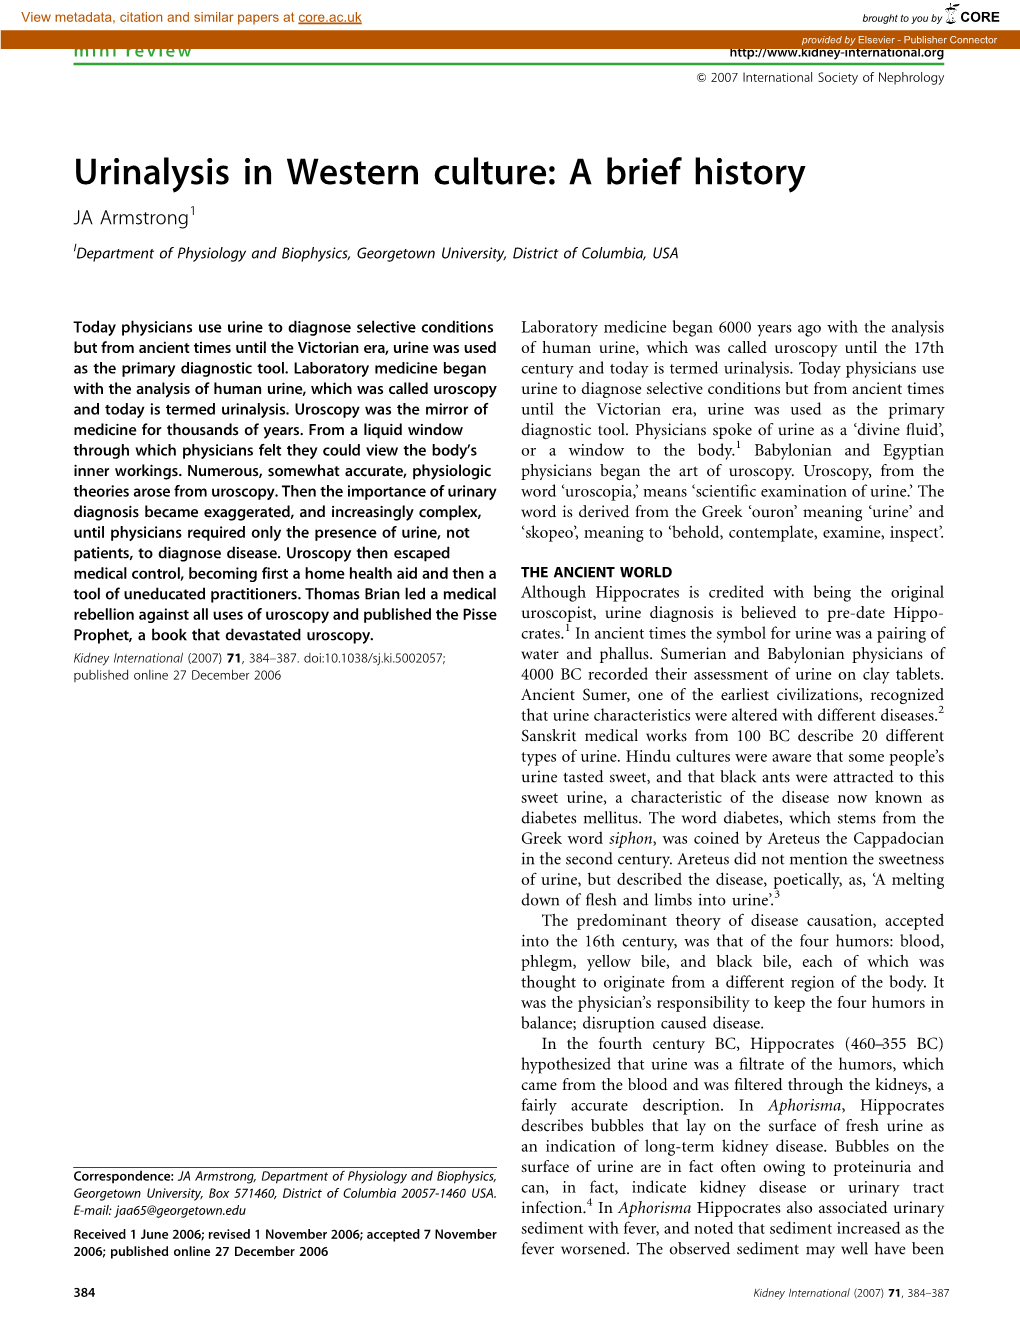 Urinalysis in Western Culture: a Brief History JA Armstrong1